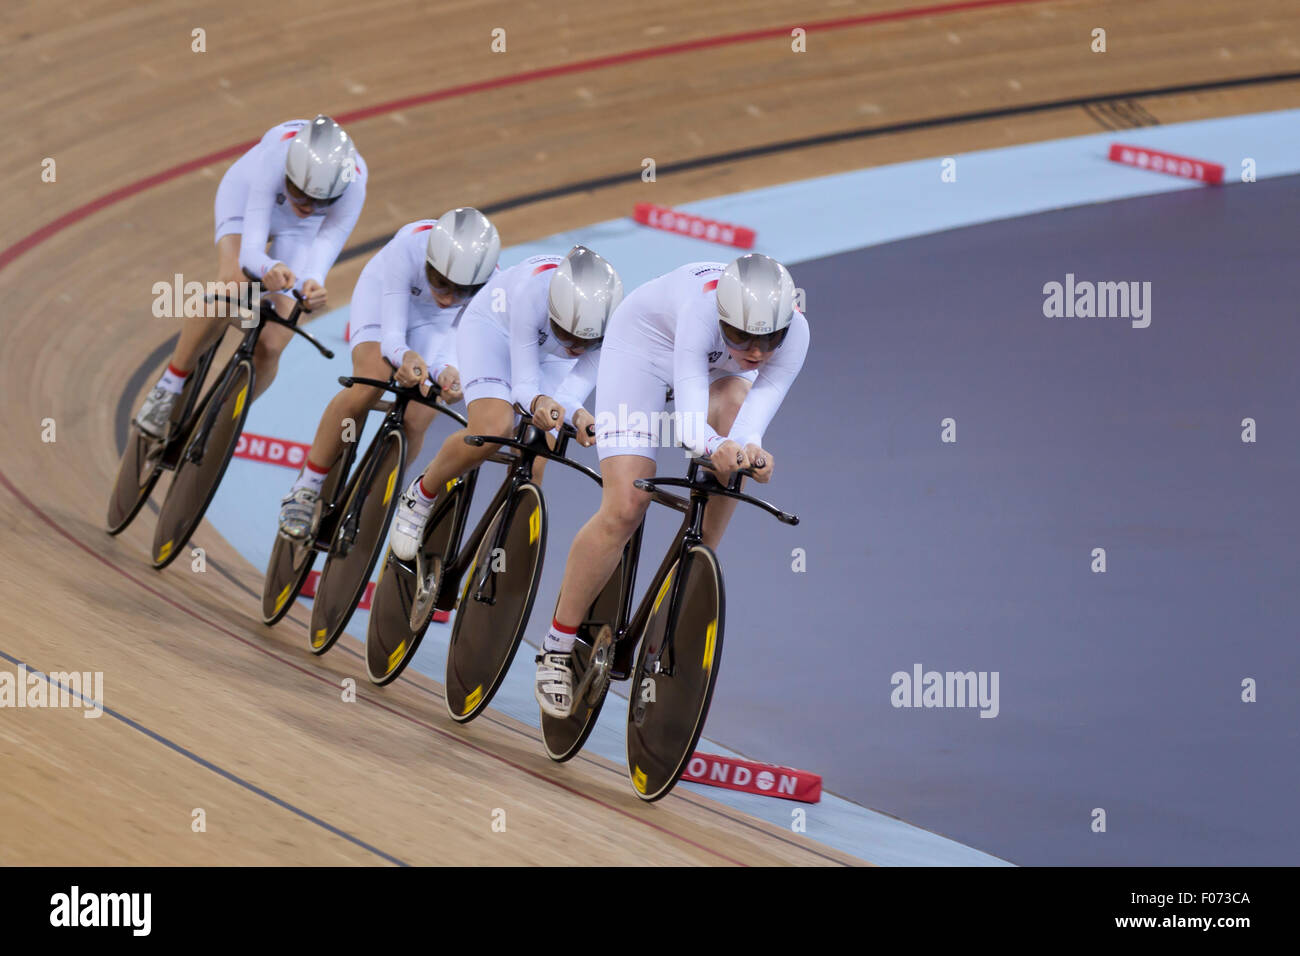 Team GB (Great Britain) taking Gold in the final of the Women's Team Pursuit at the 2014 UCI Track Cycling World Cup, London Stock Photo